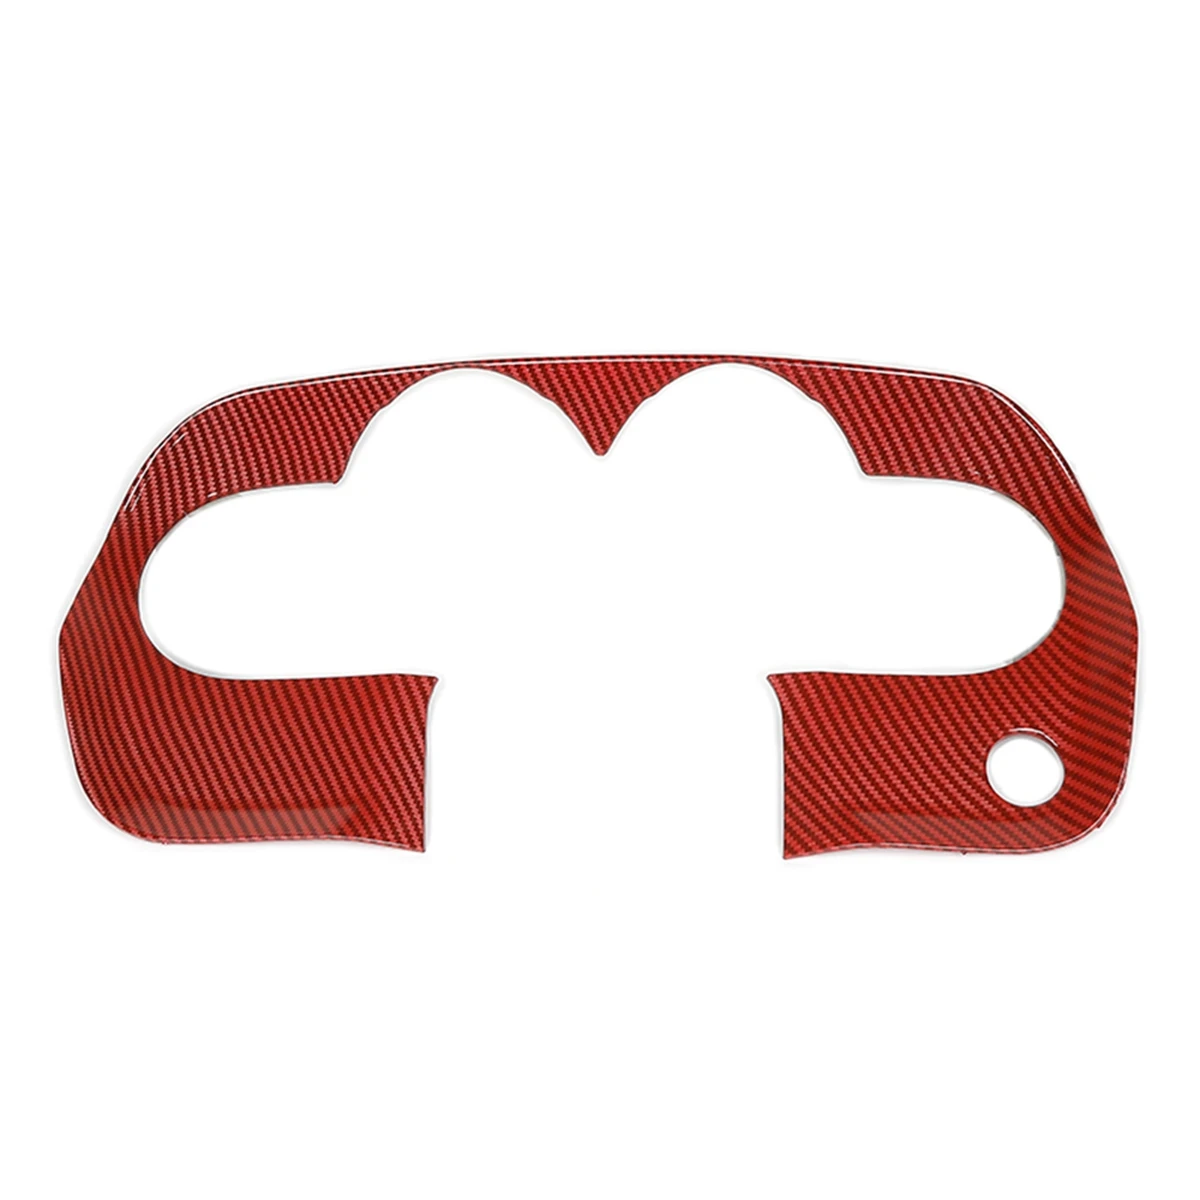 

Dashboard Panel Central Control Instrument Trim Cover for Dodge Challenger 2009-2014 Interior Accessories, Red